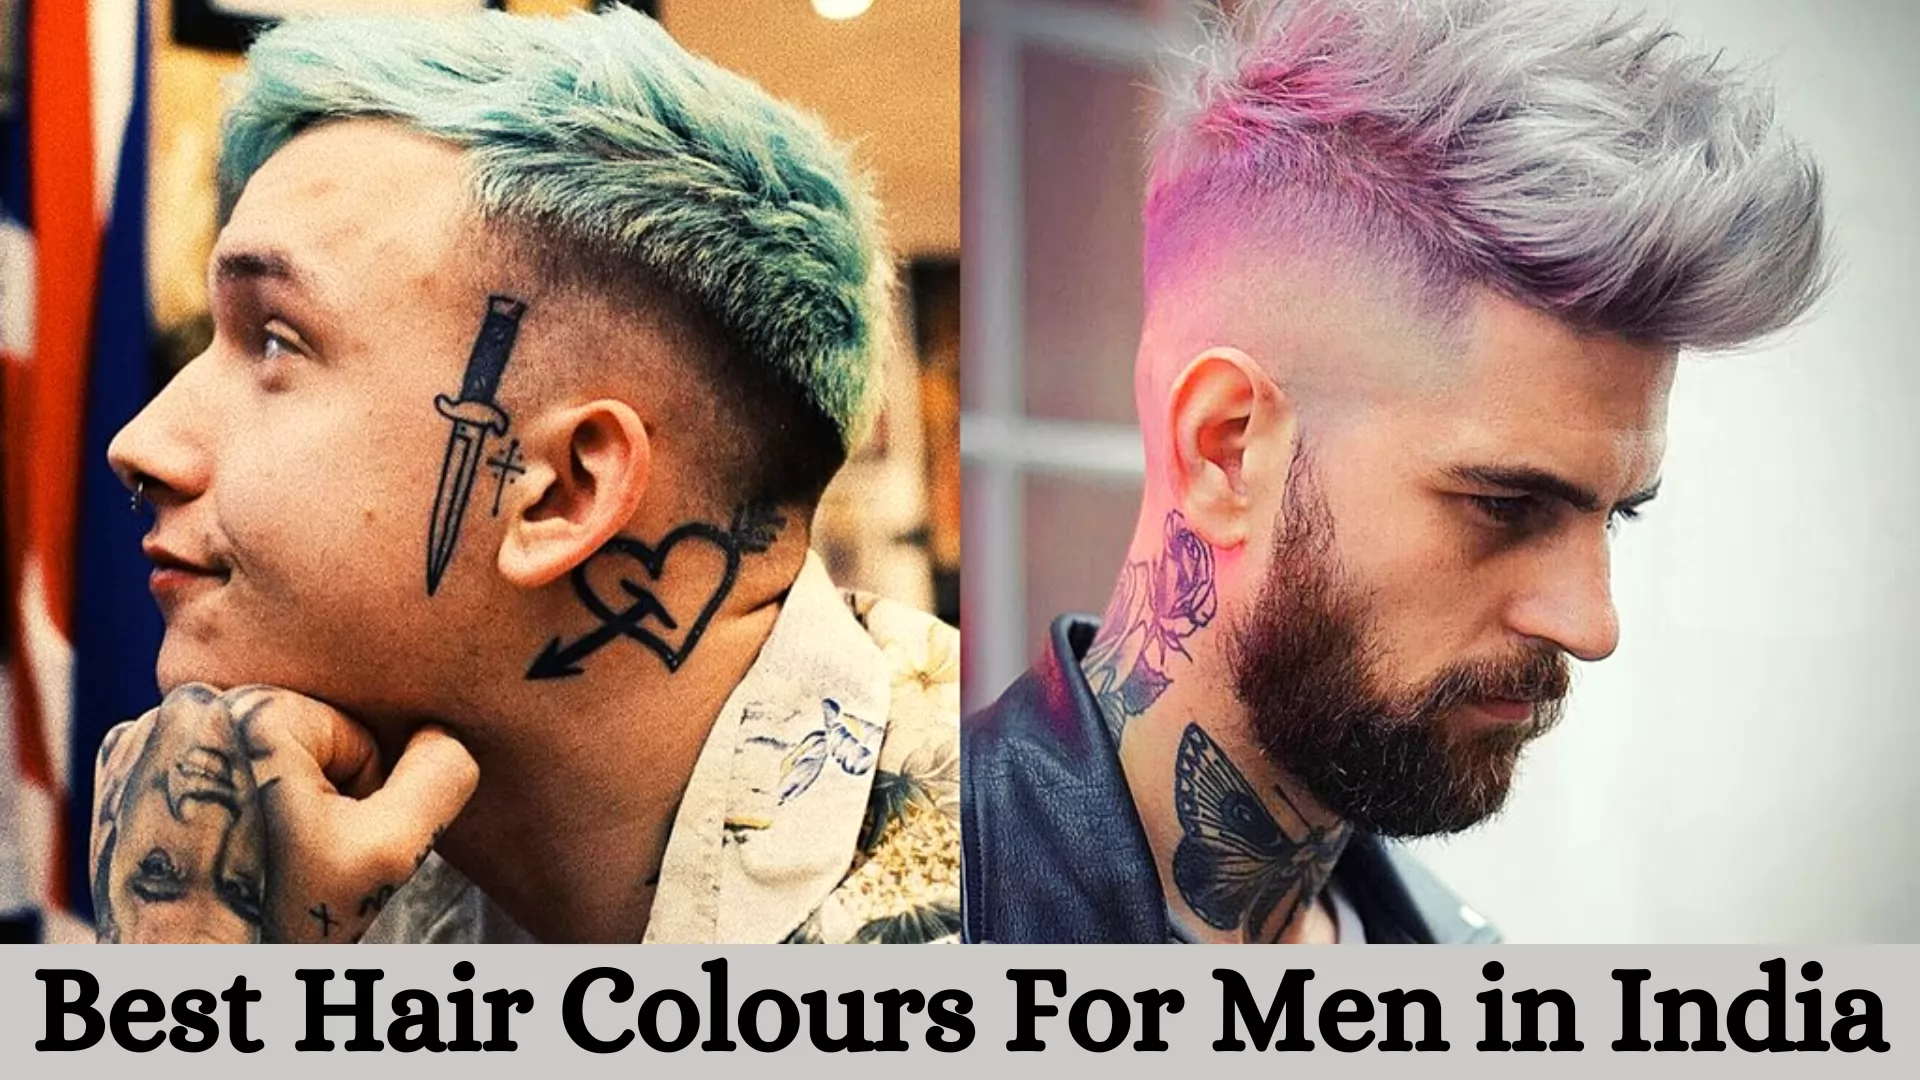 Best Hair Colours For Men in India